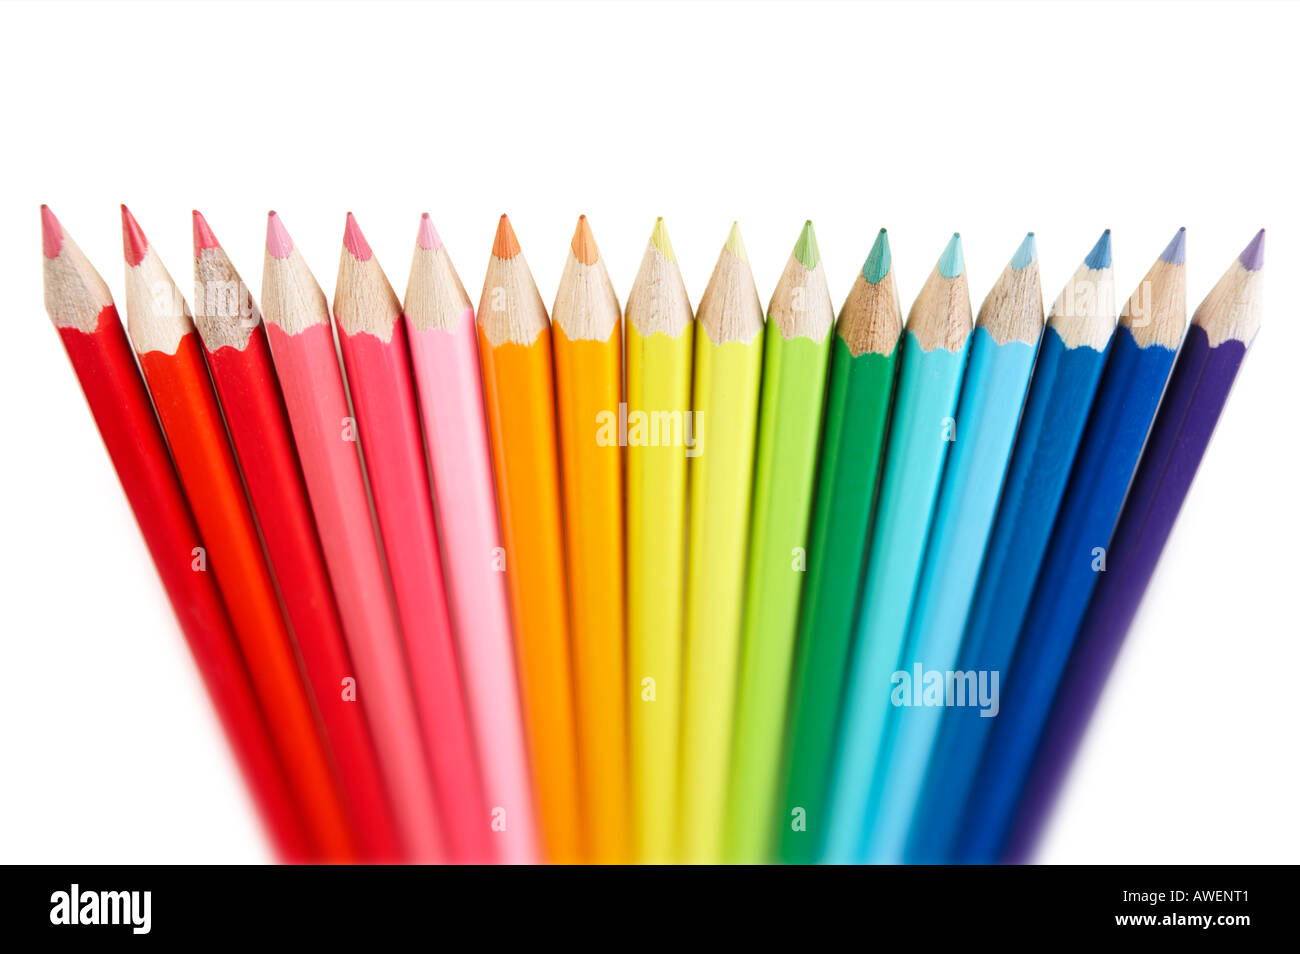 STANDING ROW OF COLOURED PENCILS Stock Photo